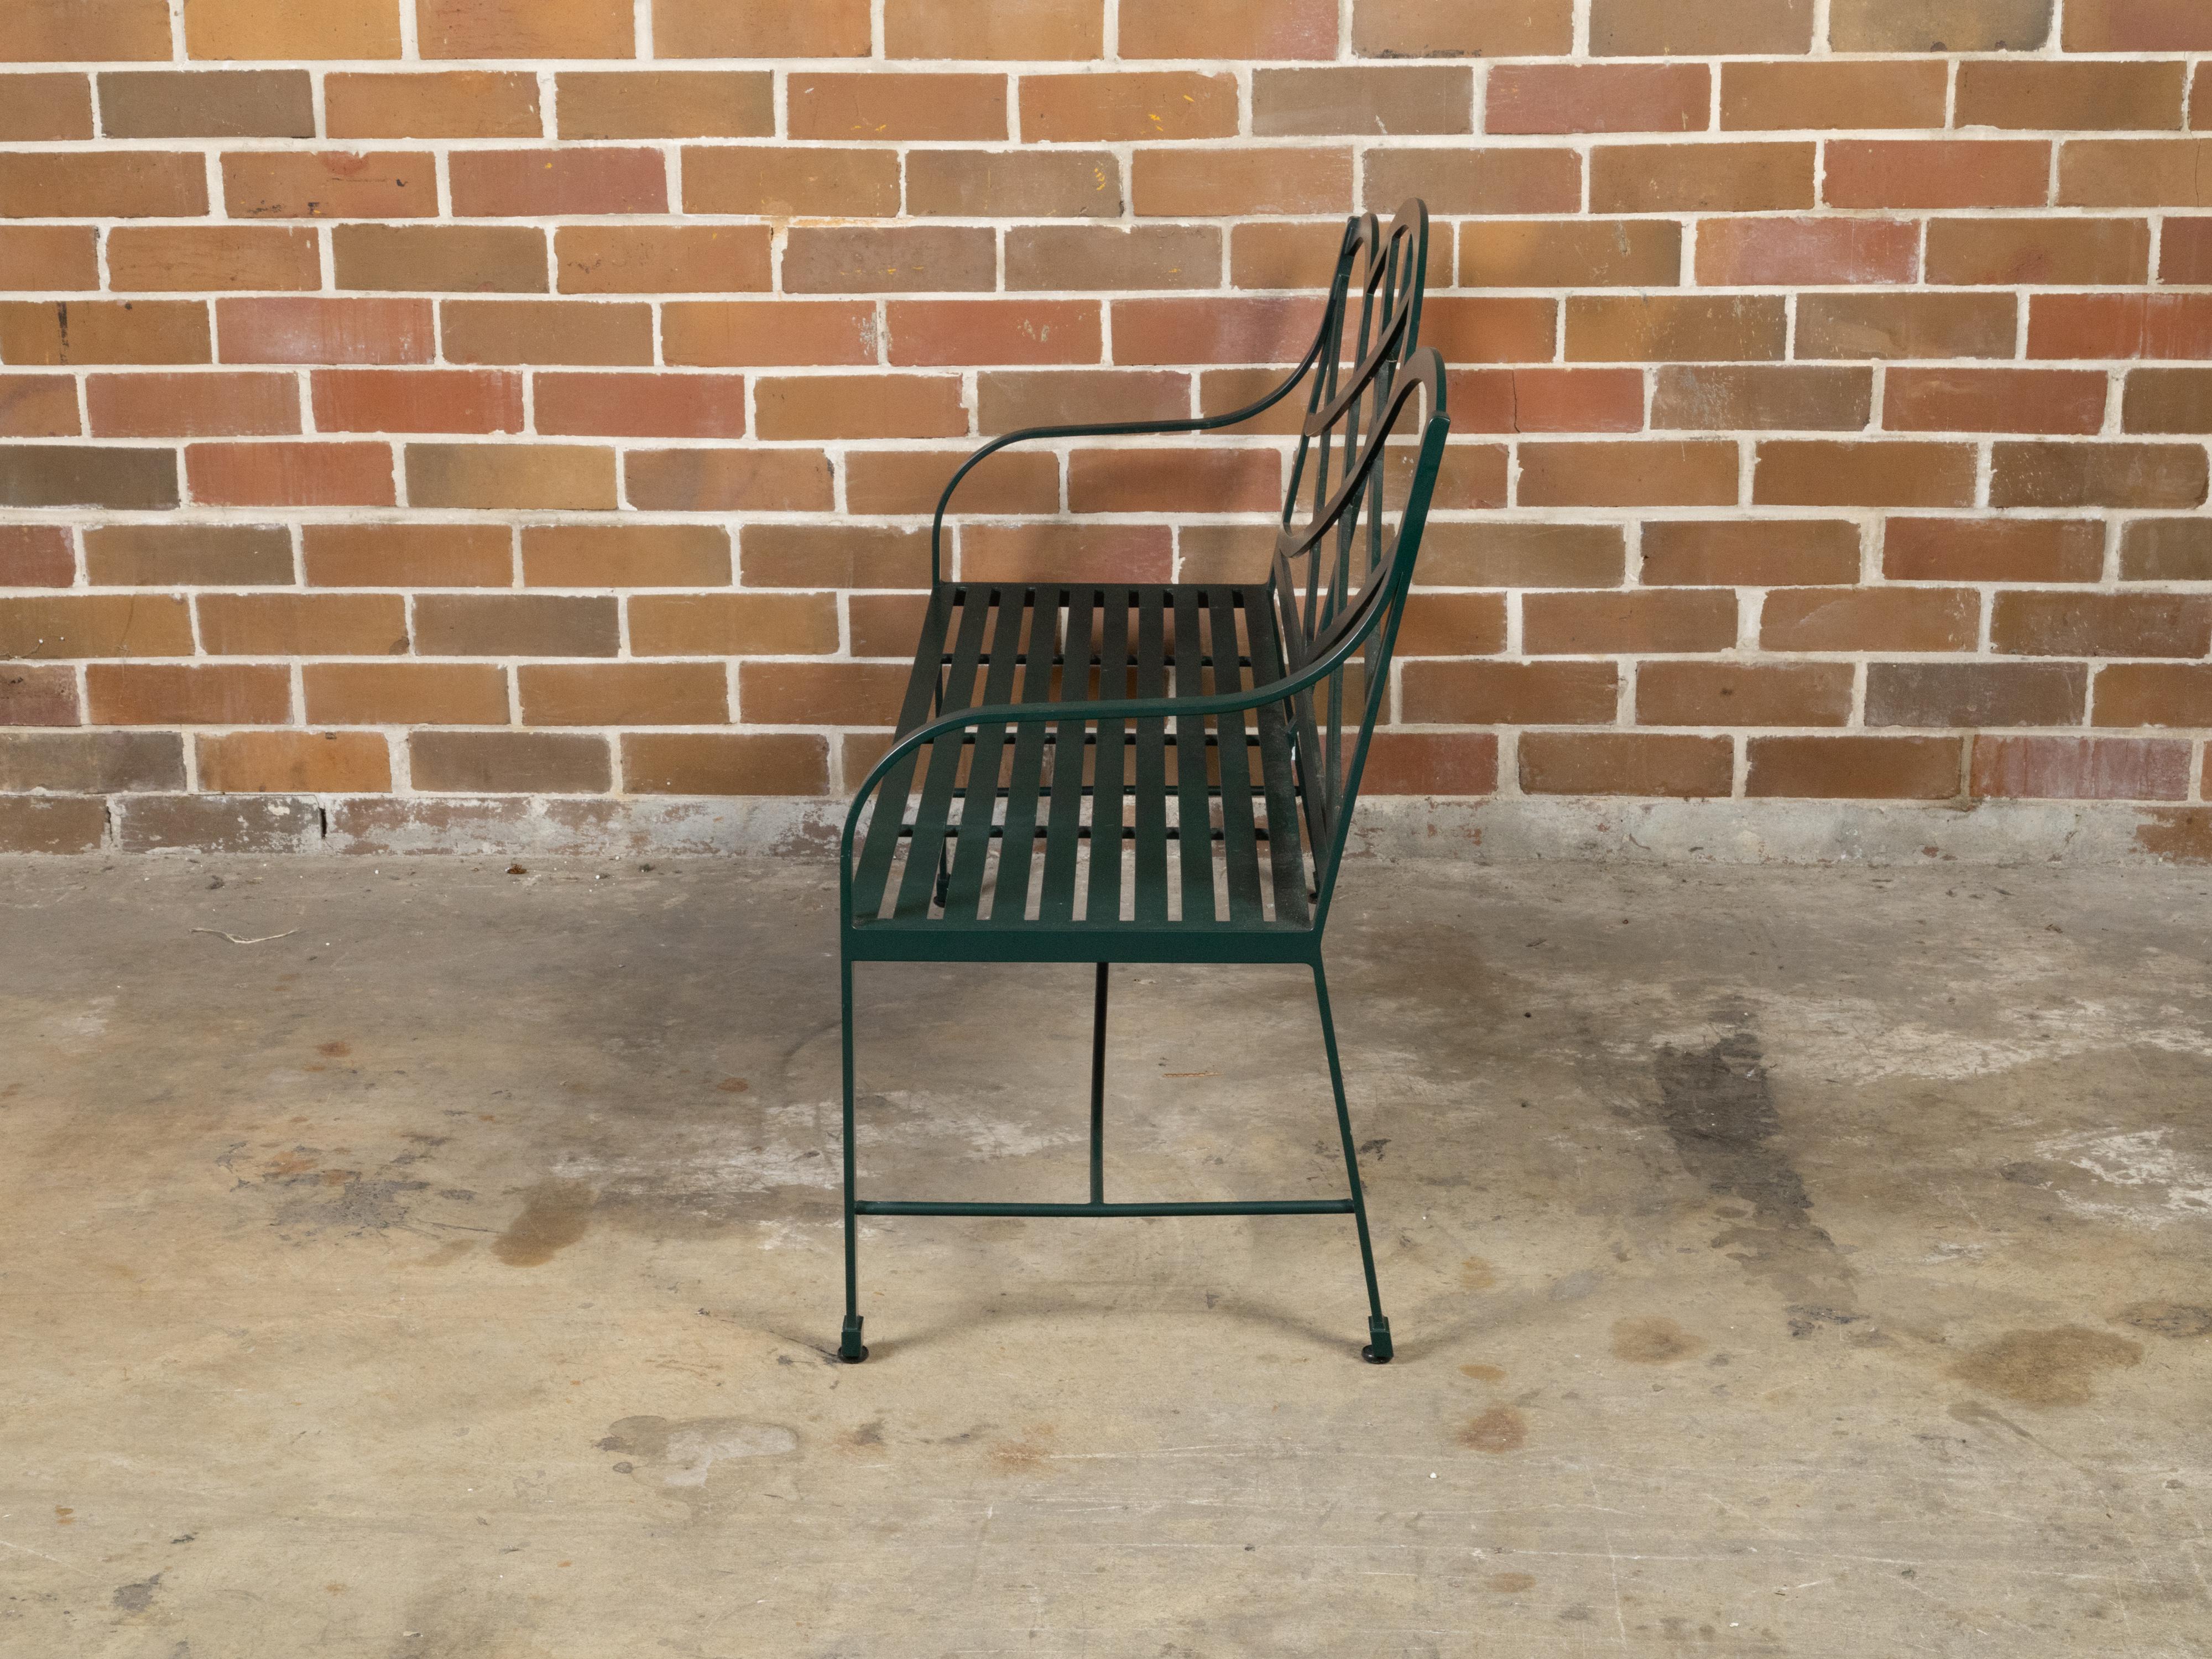 Painted Vintage McKinnon and Harris Dark Green Aluminum Garden Bench with Arched Back